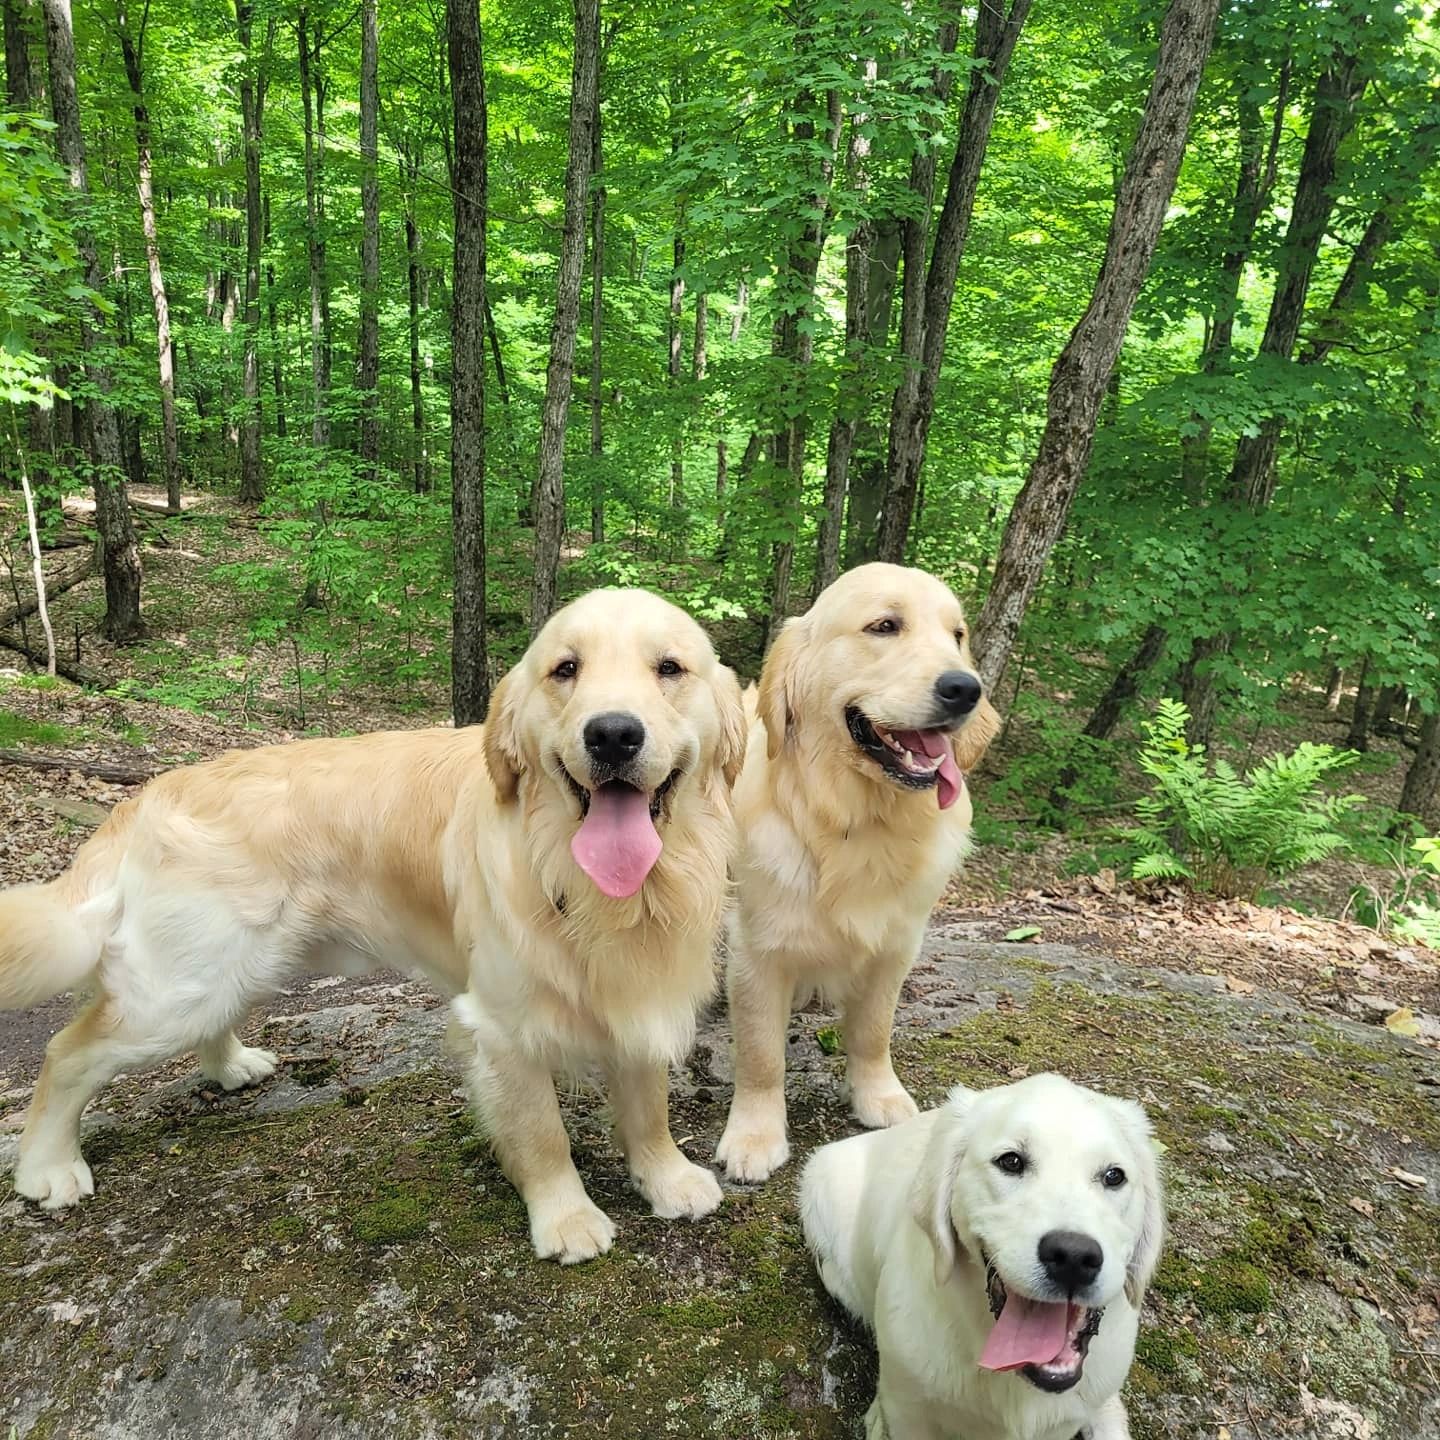 Three golden retrievers in the forest with their tongues hanging out on a warm day